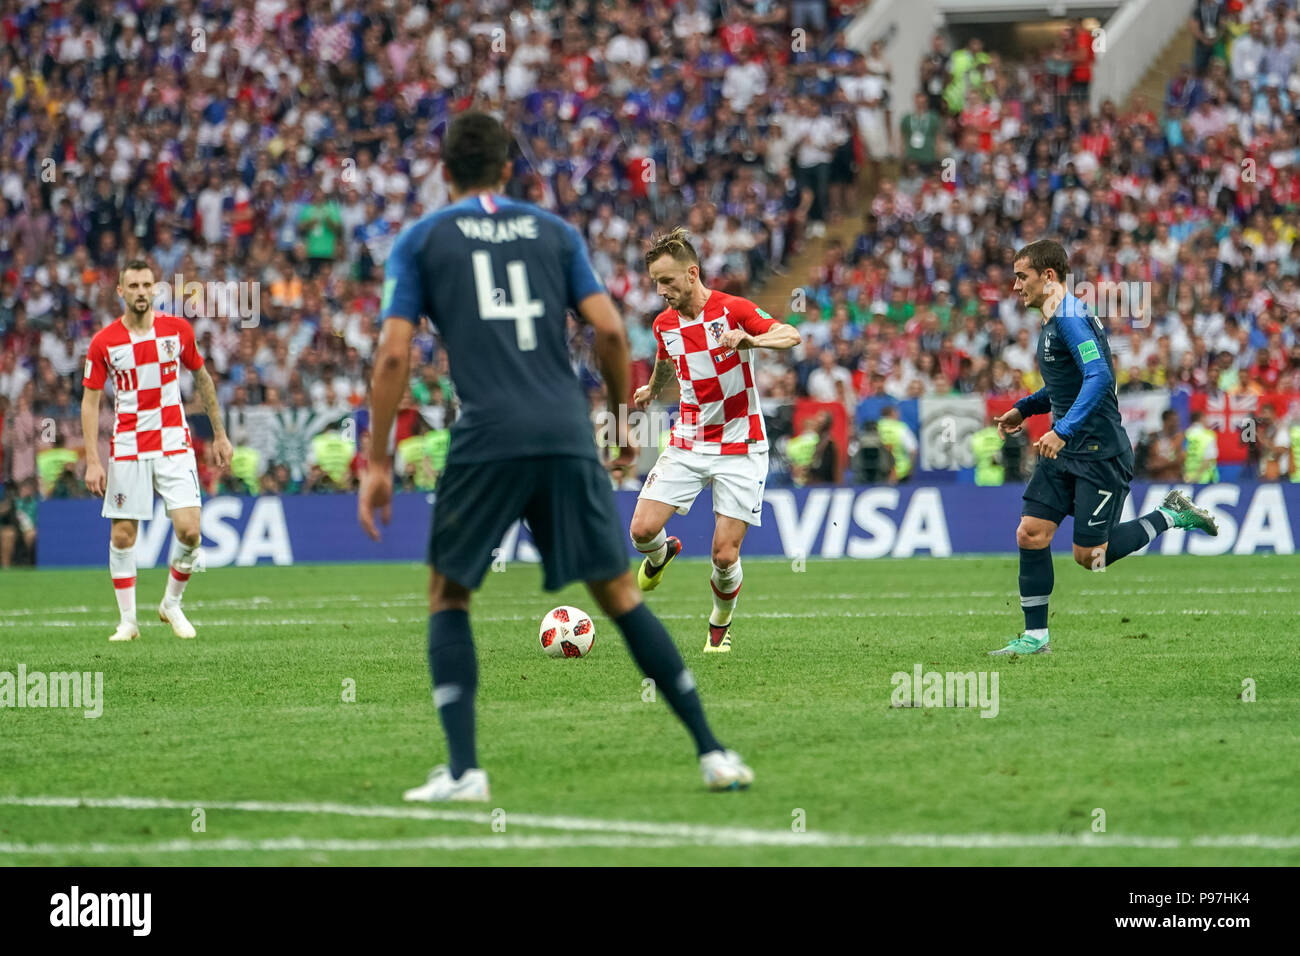 Moscow, Russia. 15th July 2018. Ivan Rakitic of Croatia going past Antoine Griezmann of France at Luzhniki Stadium during the final between Franceand Croatia during the 2018 World Cup. Ulrik Pedersen/CSM Credit: Cal Sport Media/Alamy Live News Stock Photo